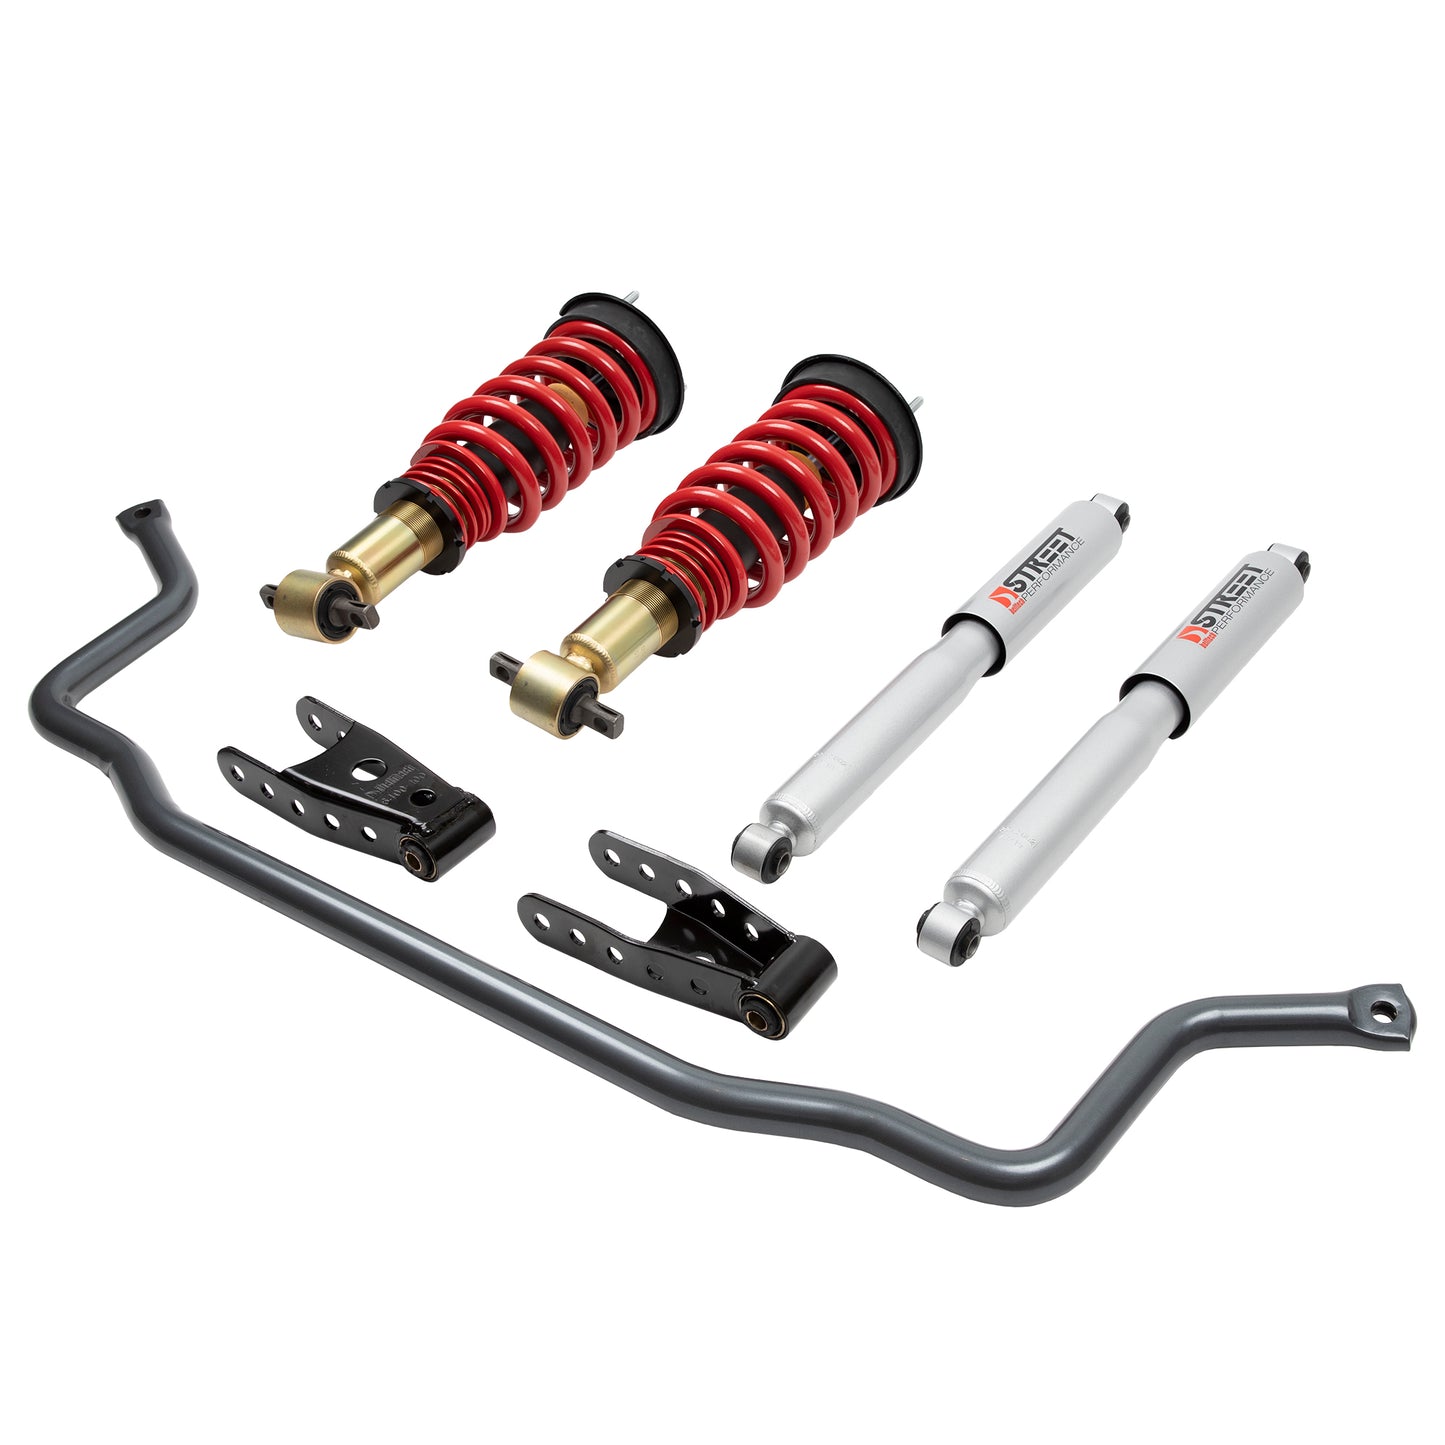 BELLTECH 985HK PERF HANDLING KIT Complete Kit Inc. Height Adjustable Front Coilovers & Front Sway Bar 2014-2018 Chevrolet Silverado/Sierra 1500 (All Cabs) Short Bed